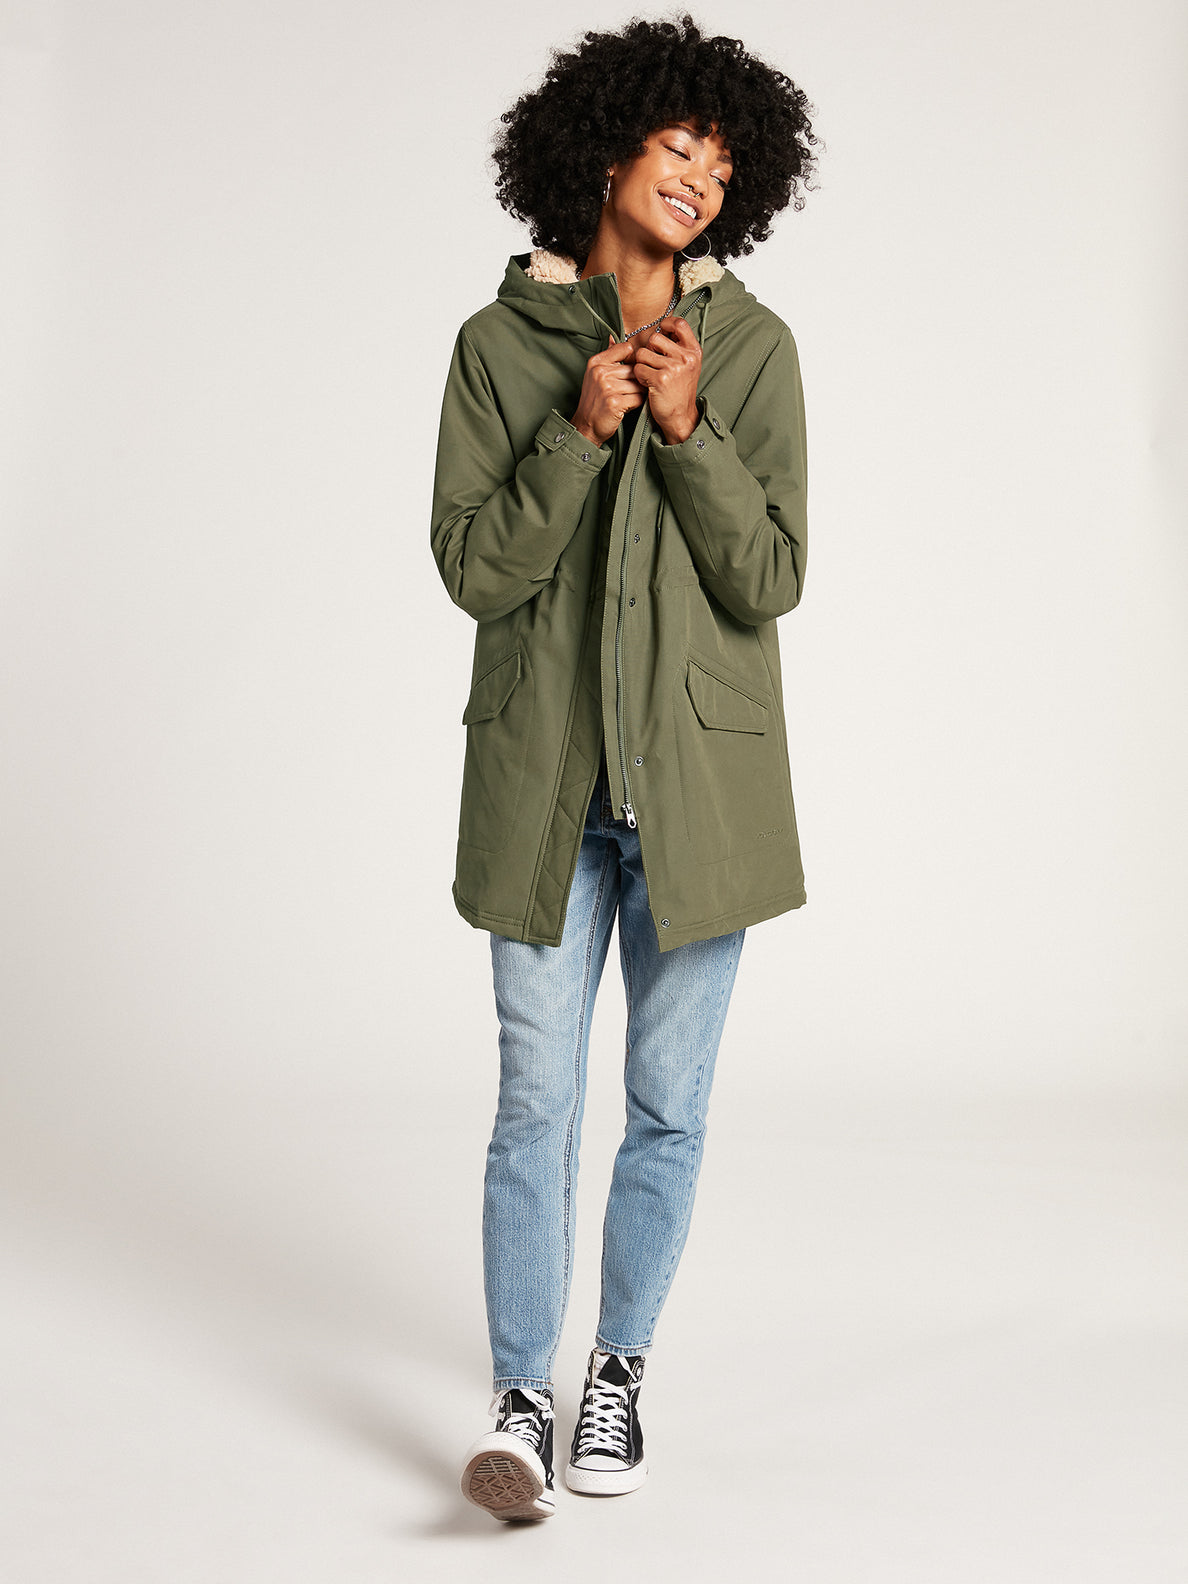 Less Is More 5K Parka - ARMY GREEN COMBO (B1732112_ARC) [3]